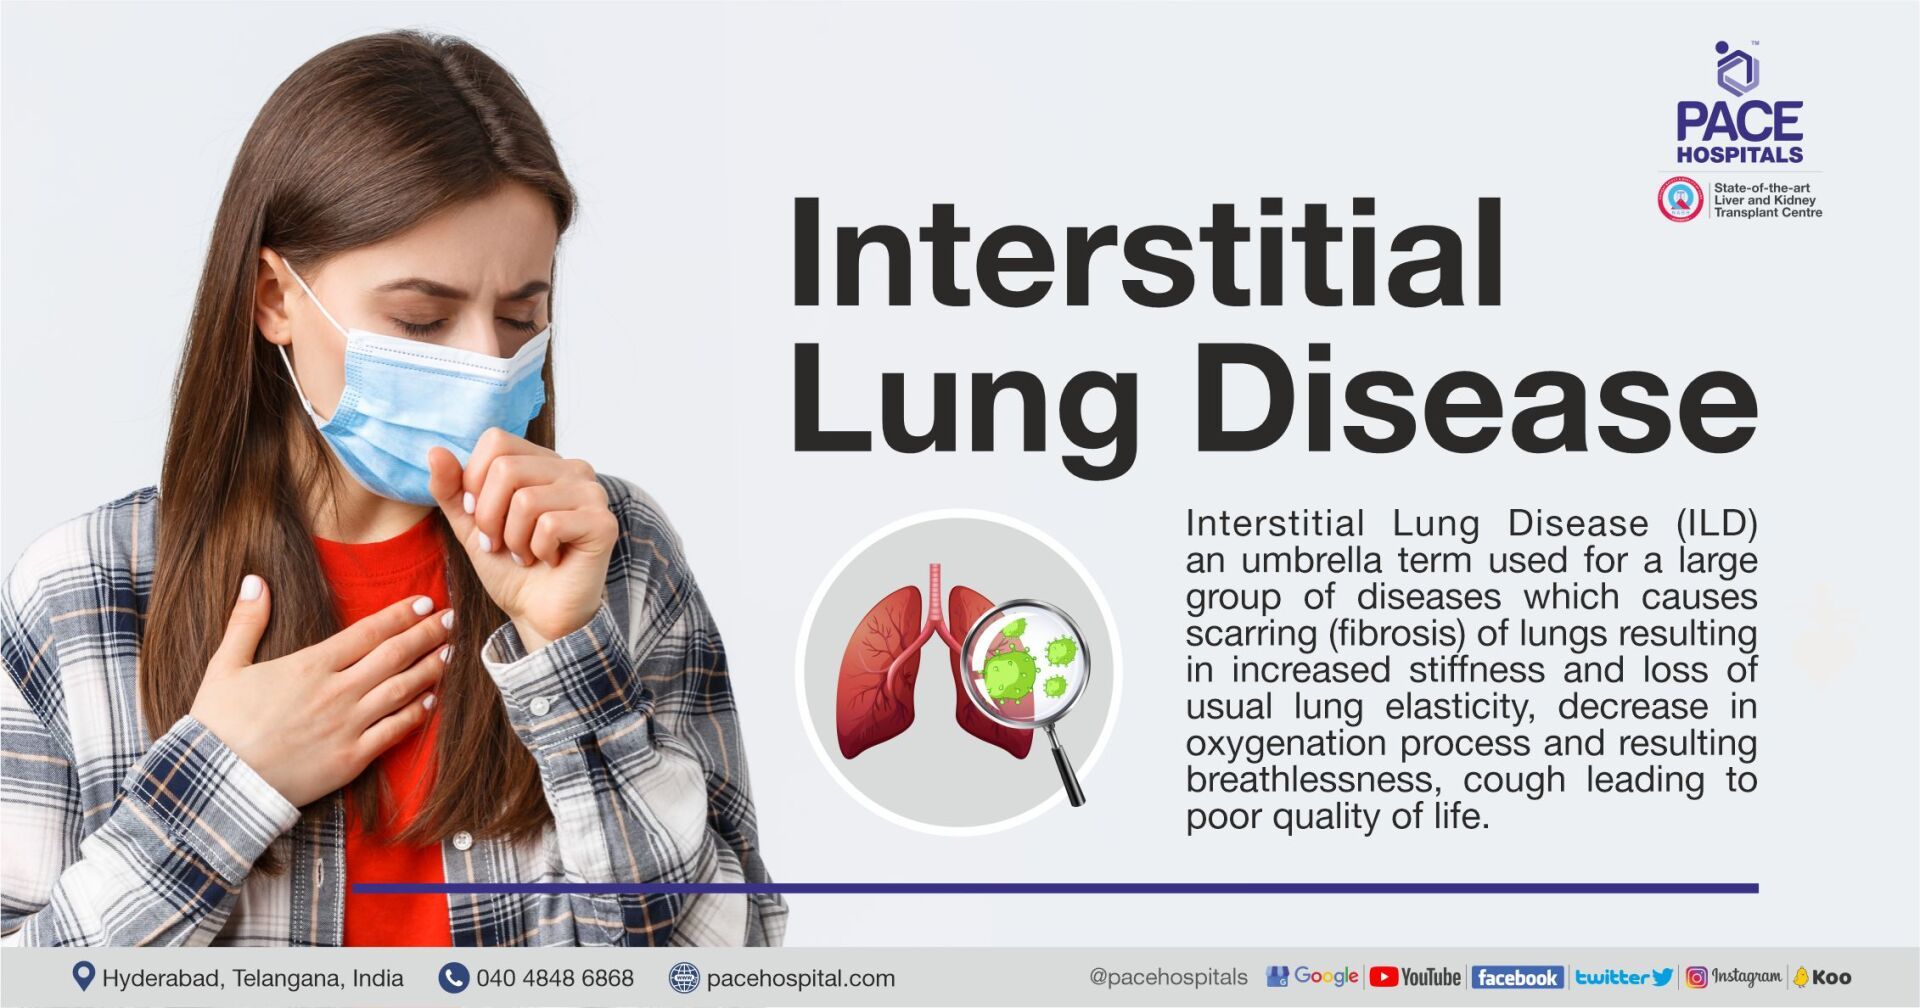 Interstitial Lung Disease - Causes, Diagnosis, Symptoms and Treatment